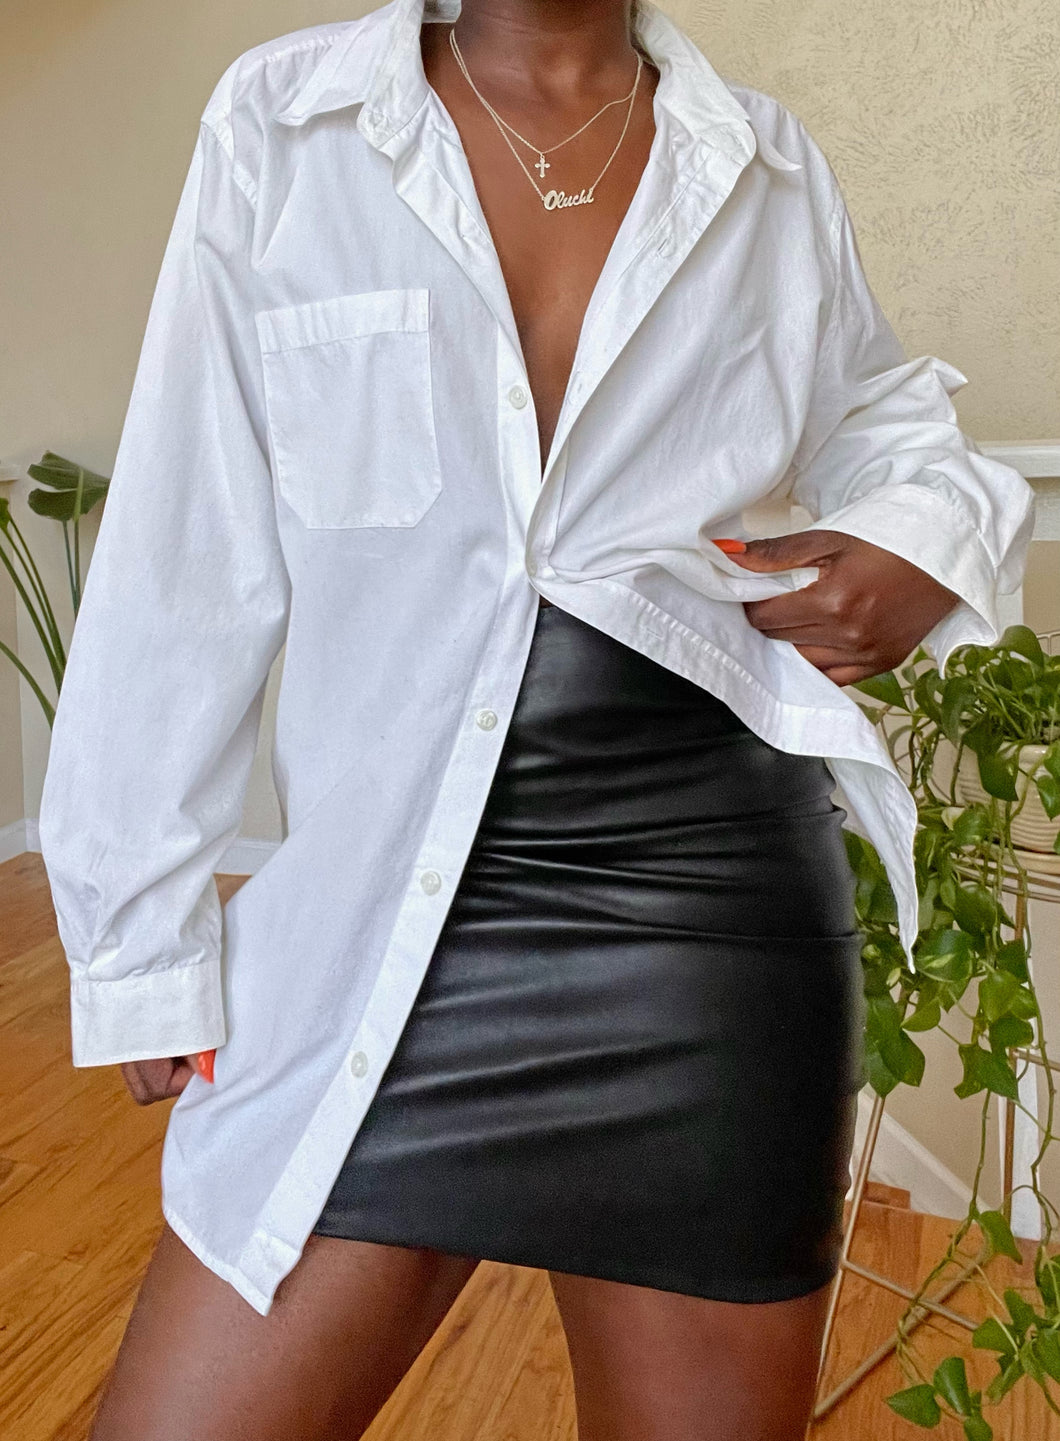 leather pencil skirt